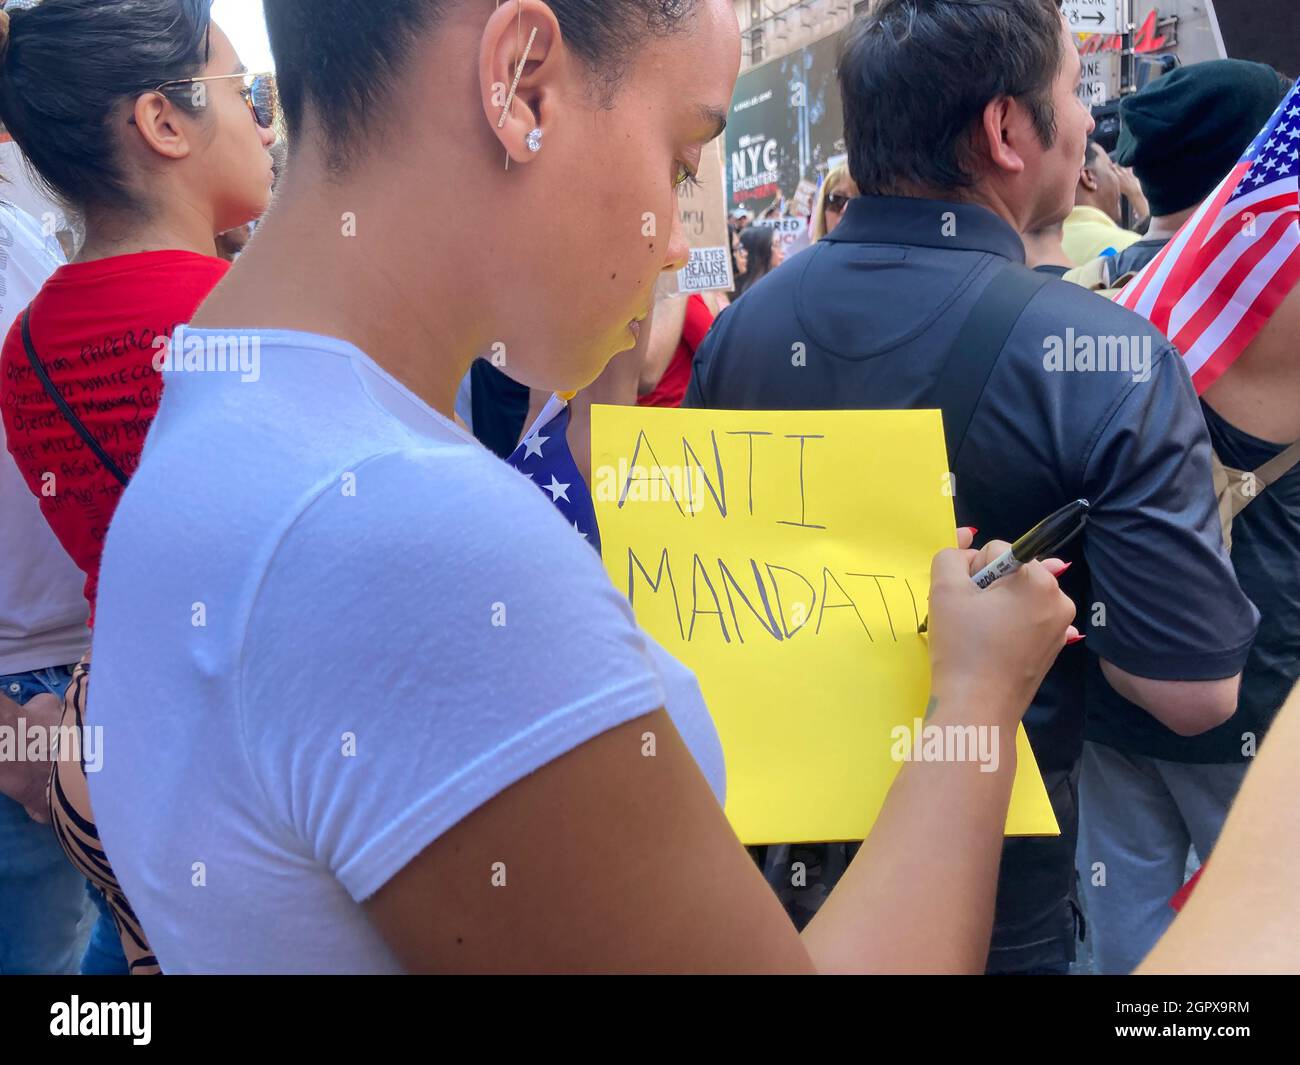 Protesters gather in Times Square in New York on Saturday, September 18, 2021 to rally against Covid-19 vaccinations. (© Frances M. Roberts) Stock Photo